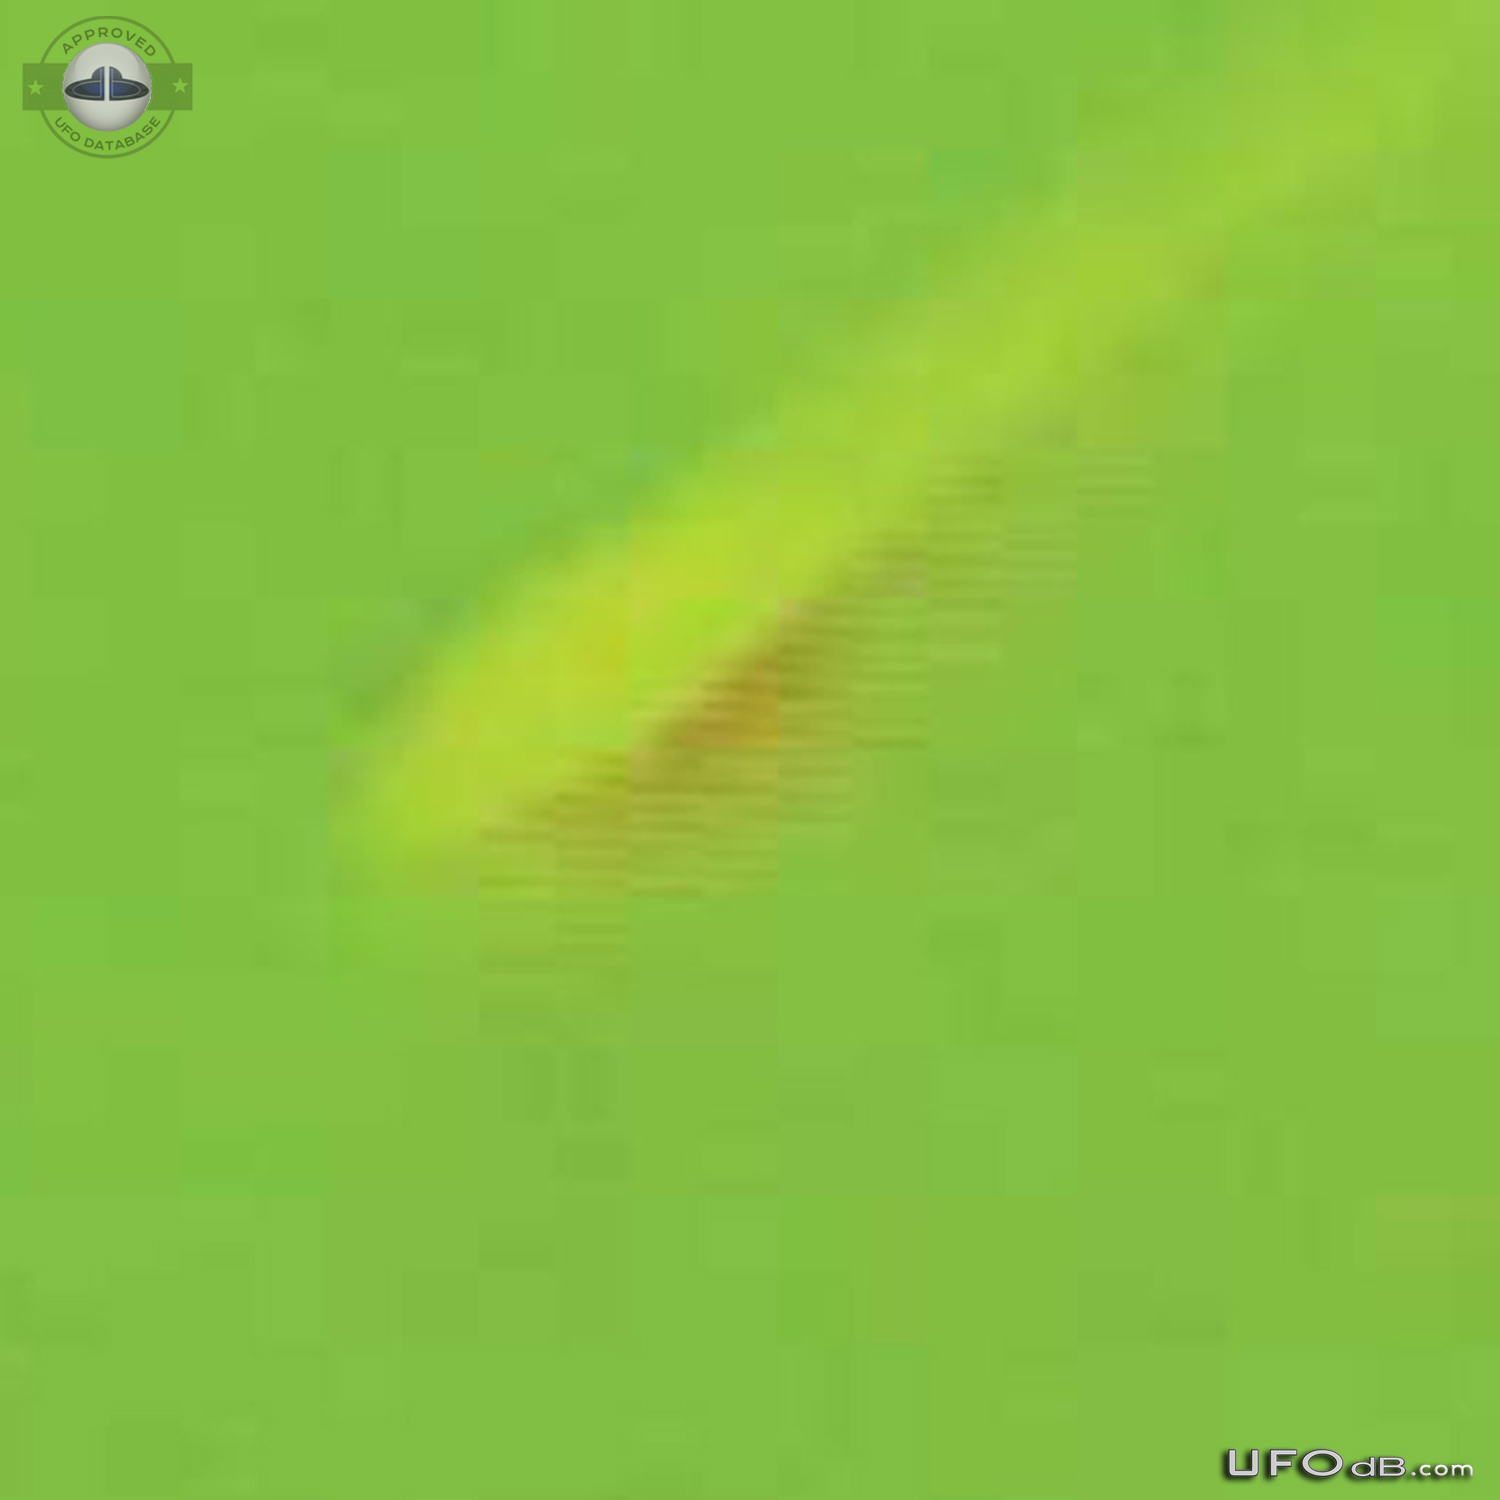 Elder man UFO sighting over Beijing China in February 10 to 27 2003 UFO Picture #615-3